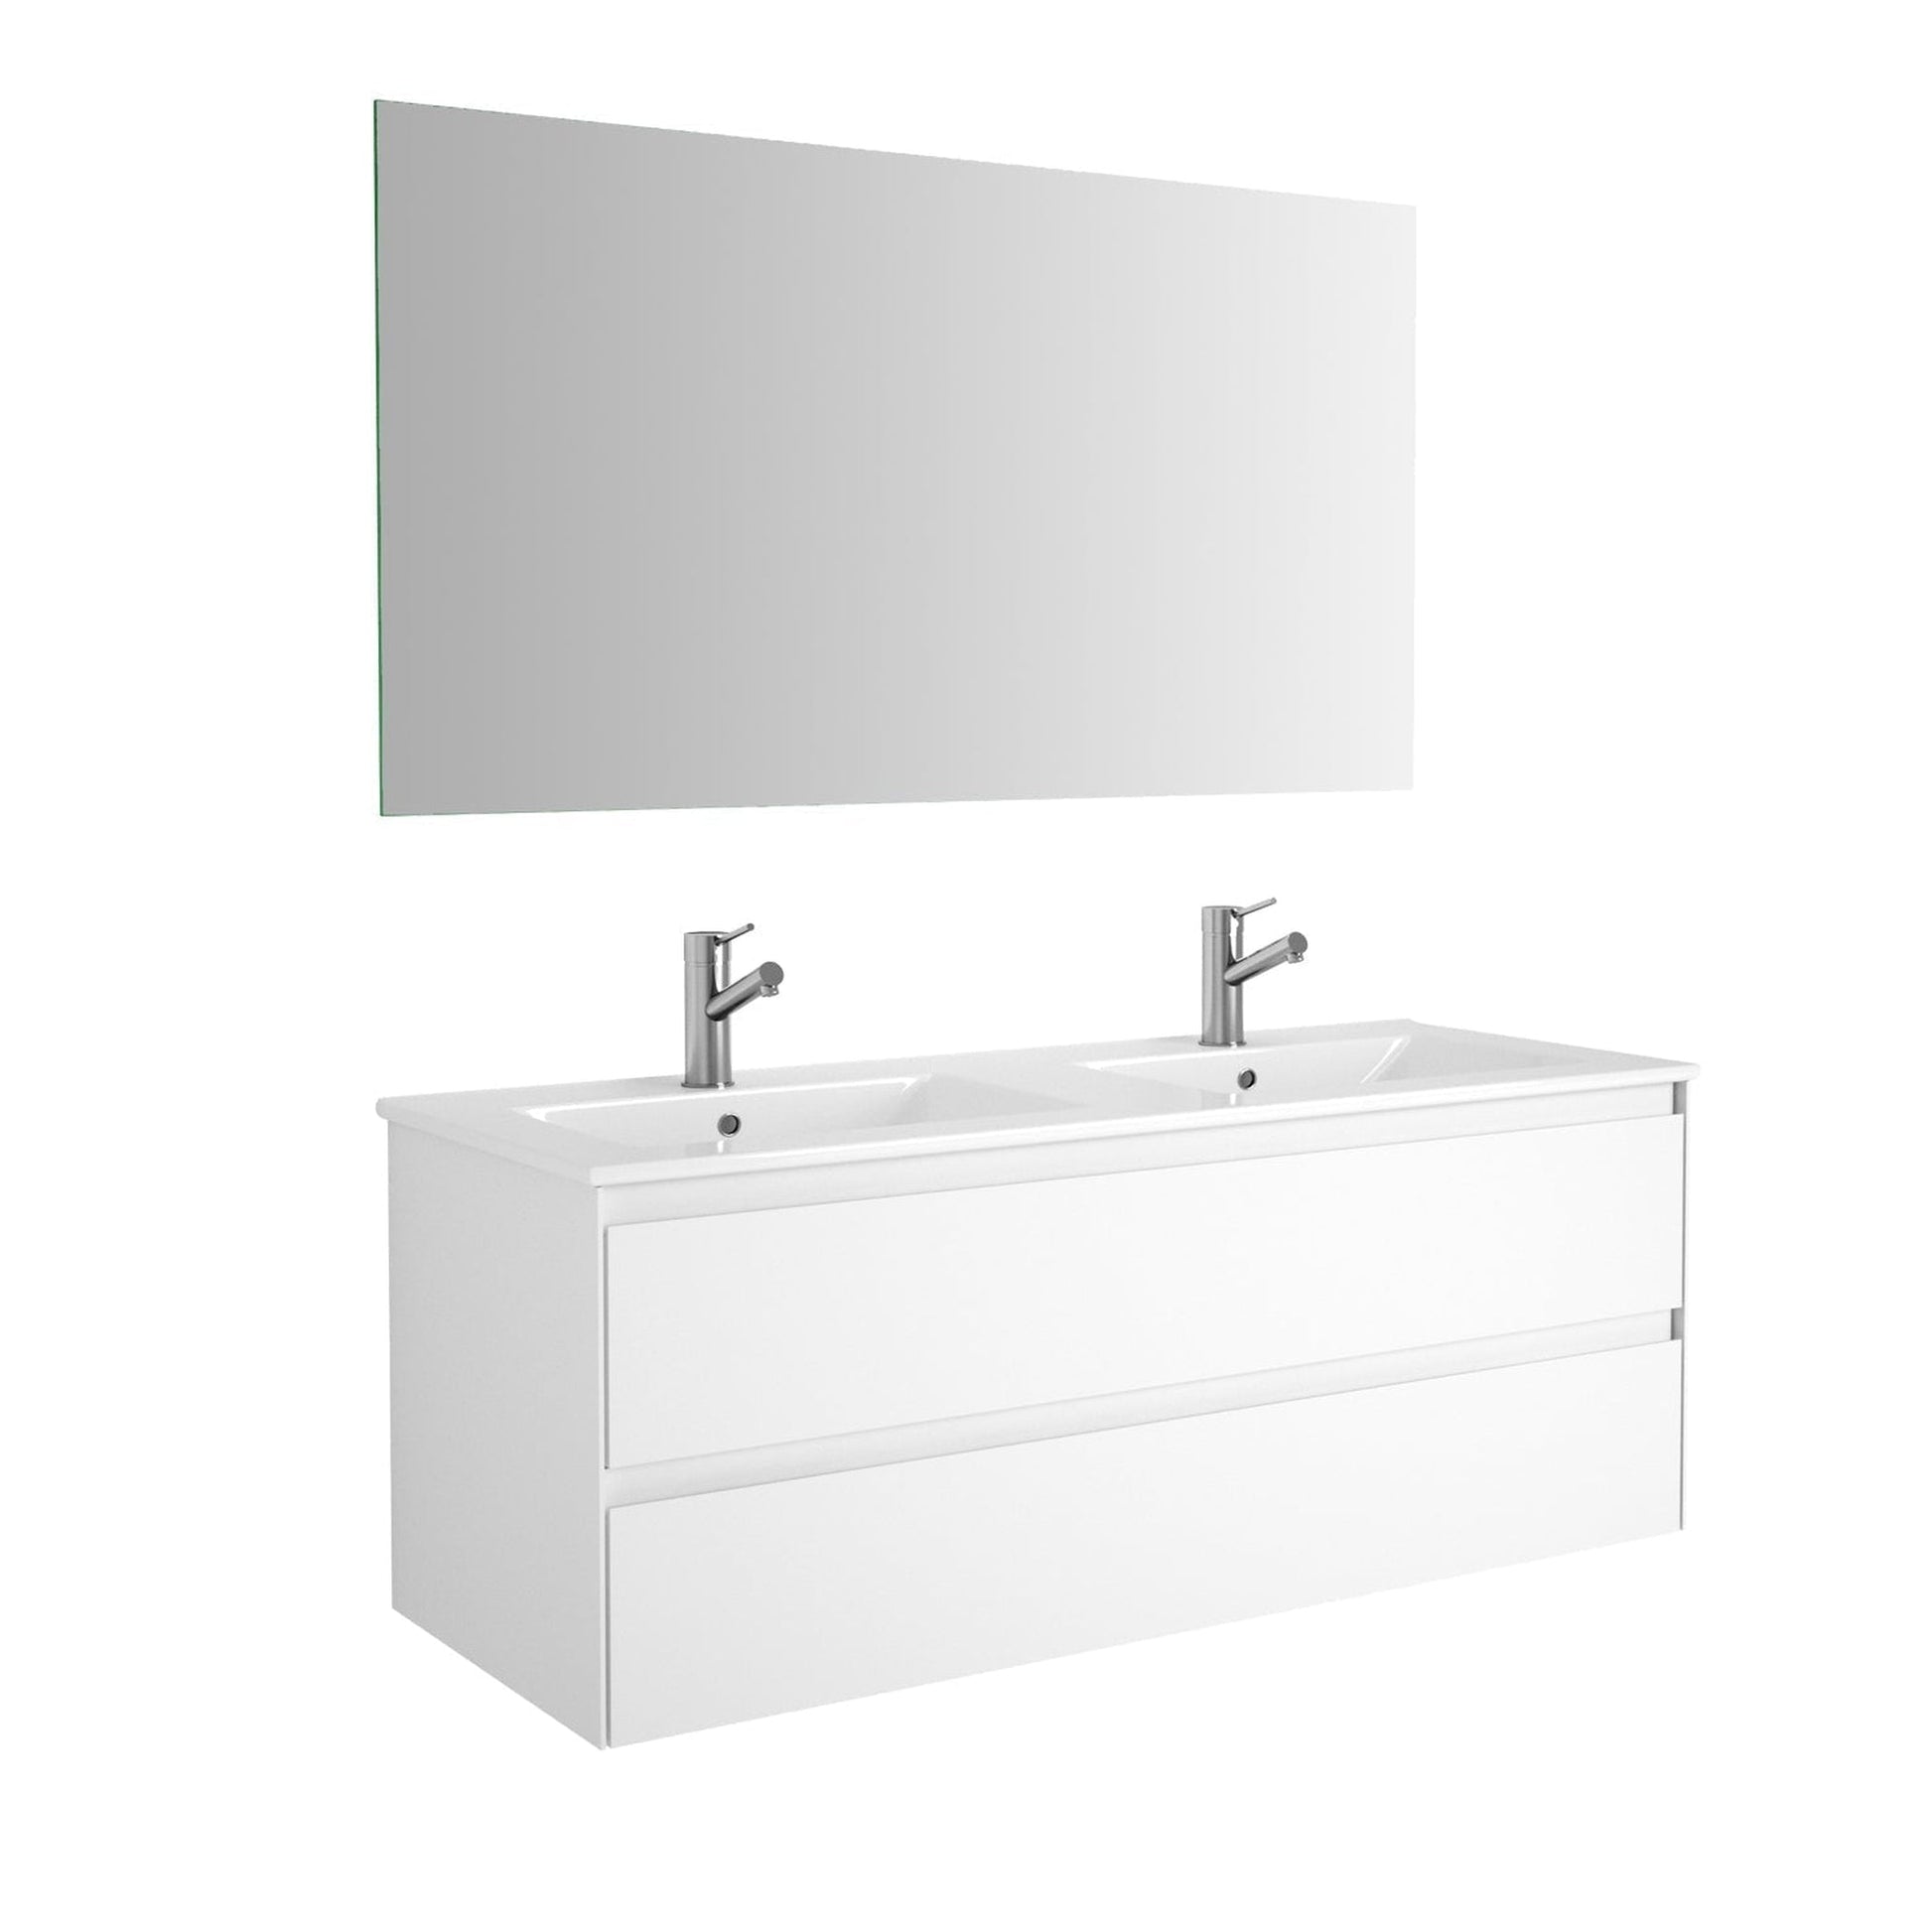 Eviva Bloom 48" x 34" Matte White Wall-Mounted Bathroom Vanity With White Double Integrated Porcelain Sink